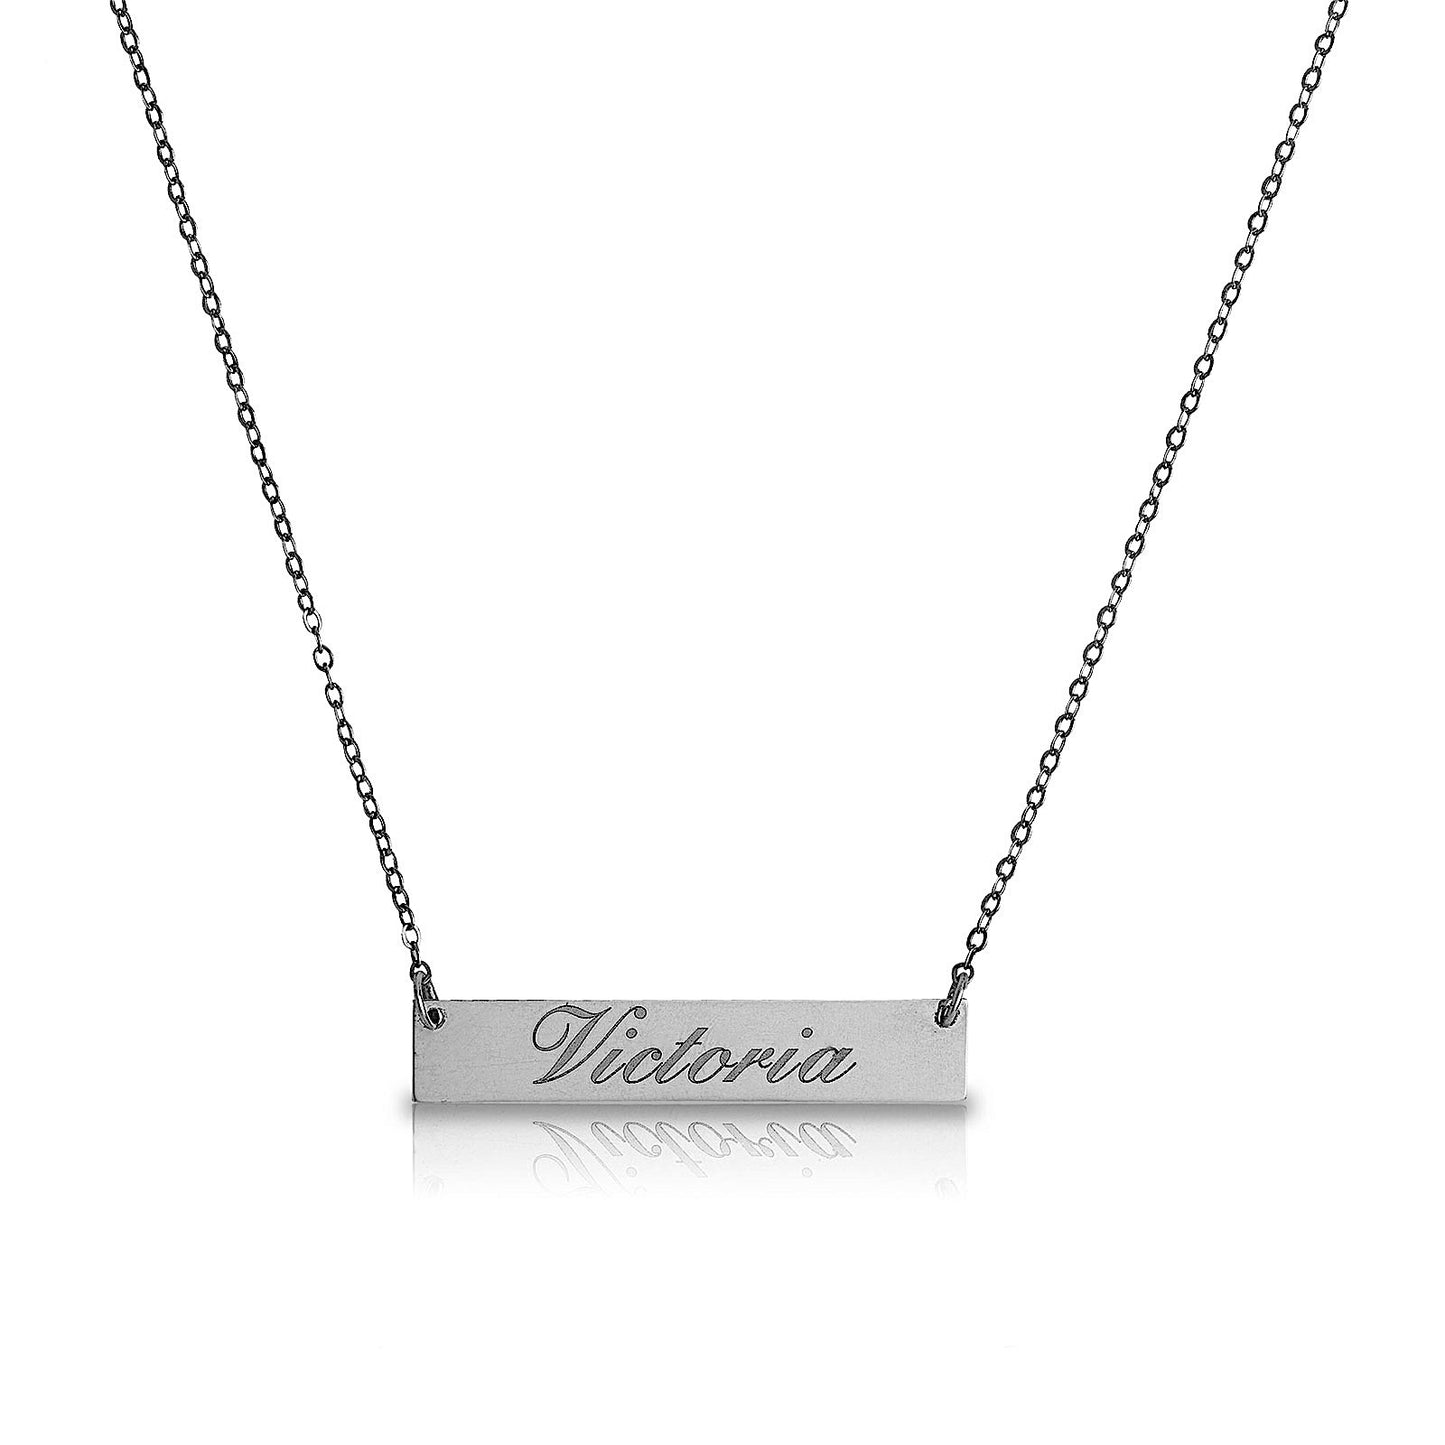 Better Jewelry Custom .925 Sterling Silver Name Bar Necklace w. Engraving